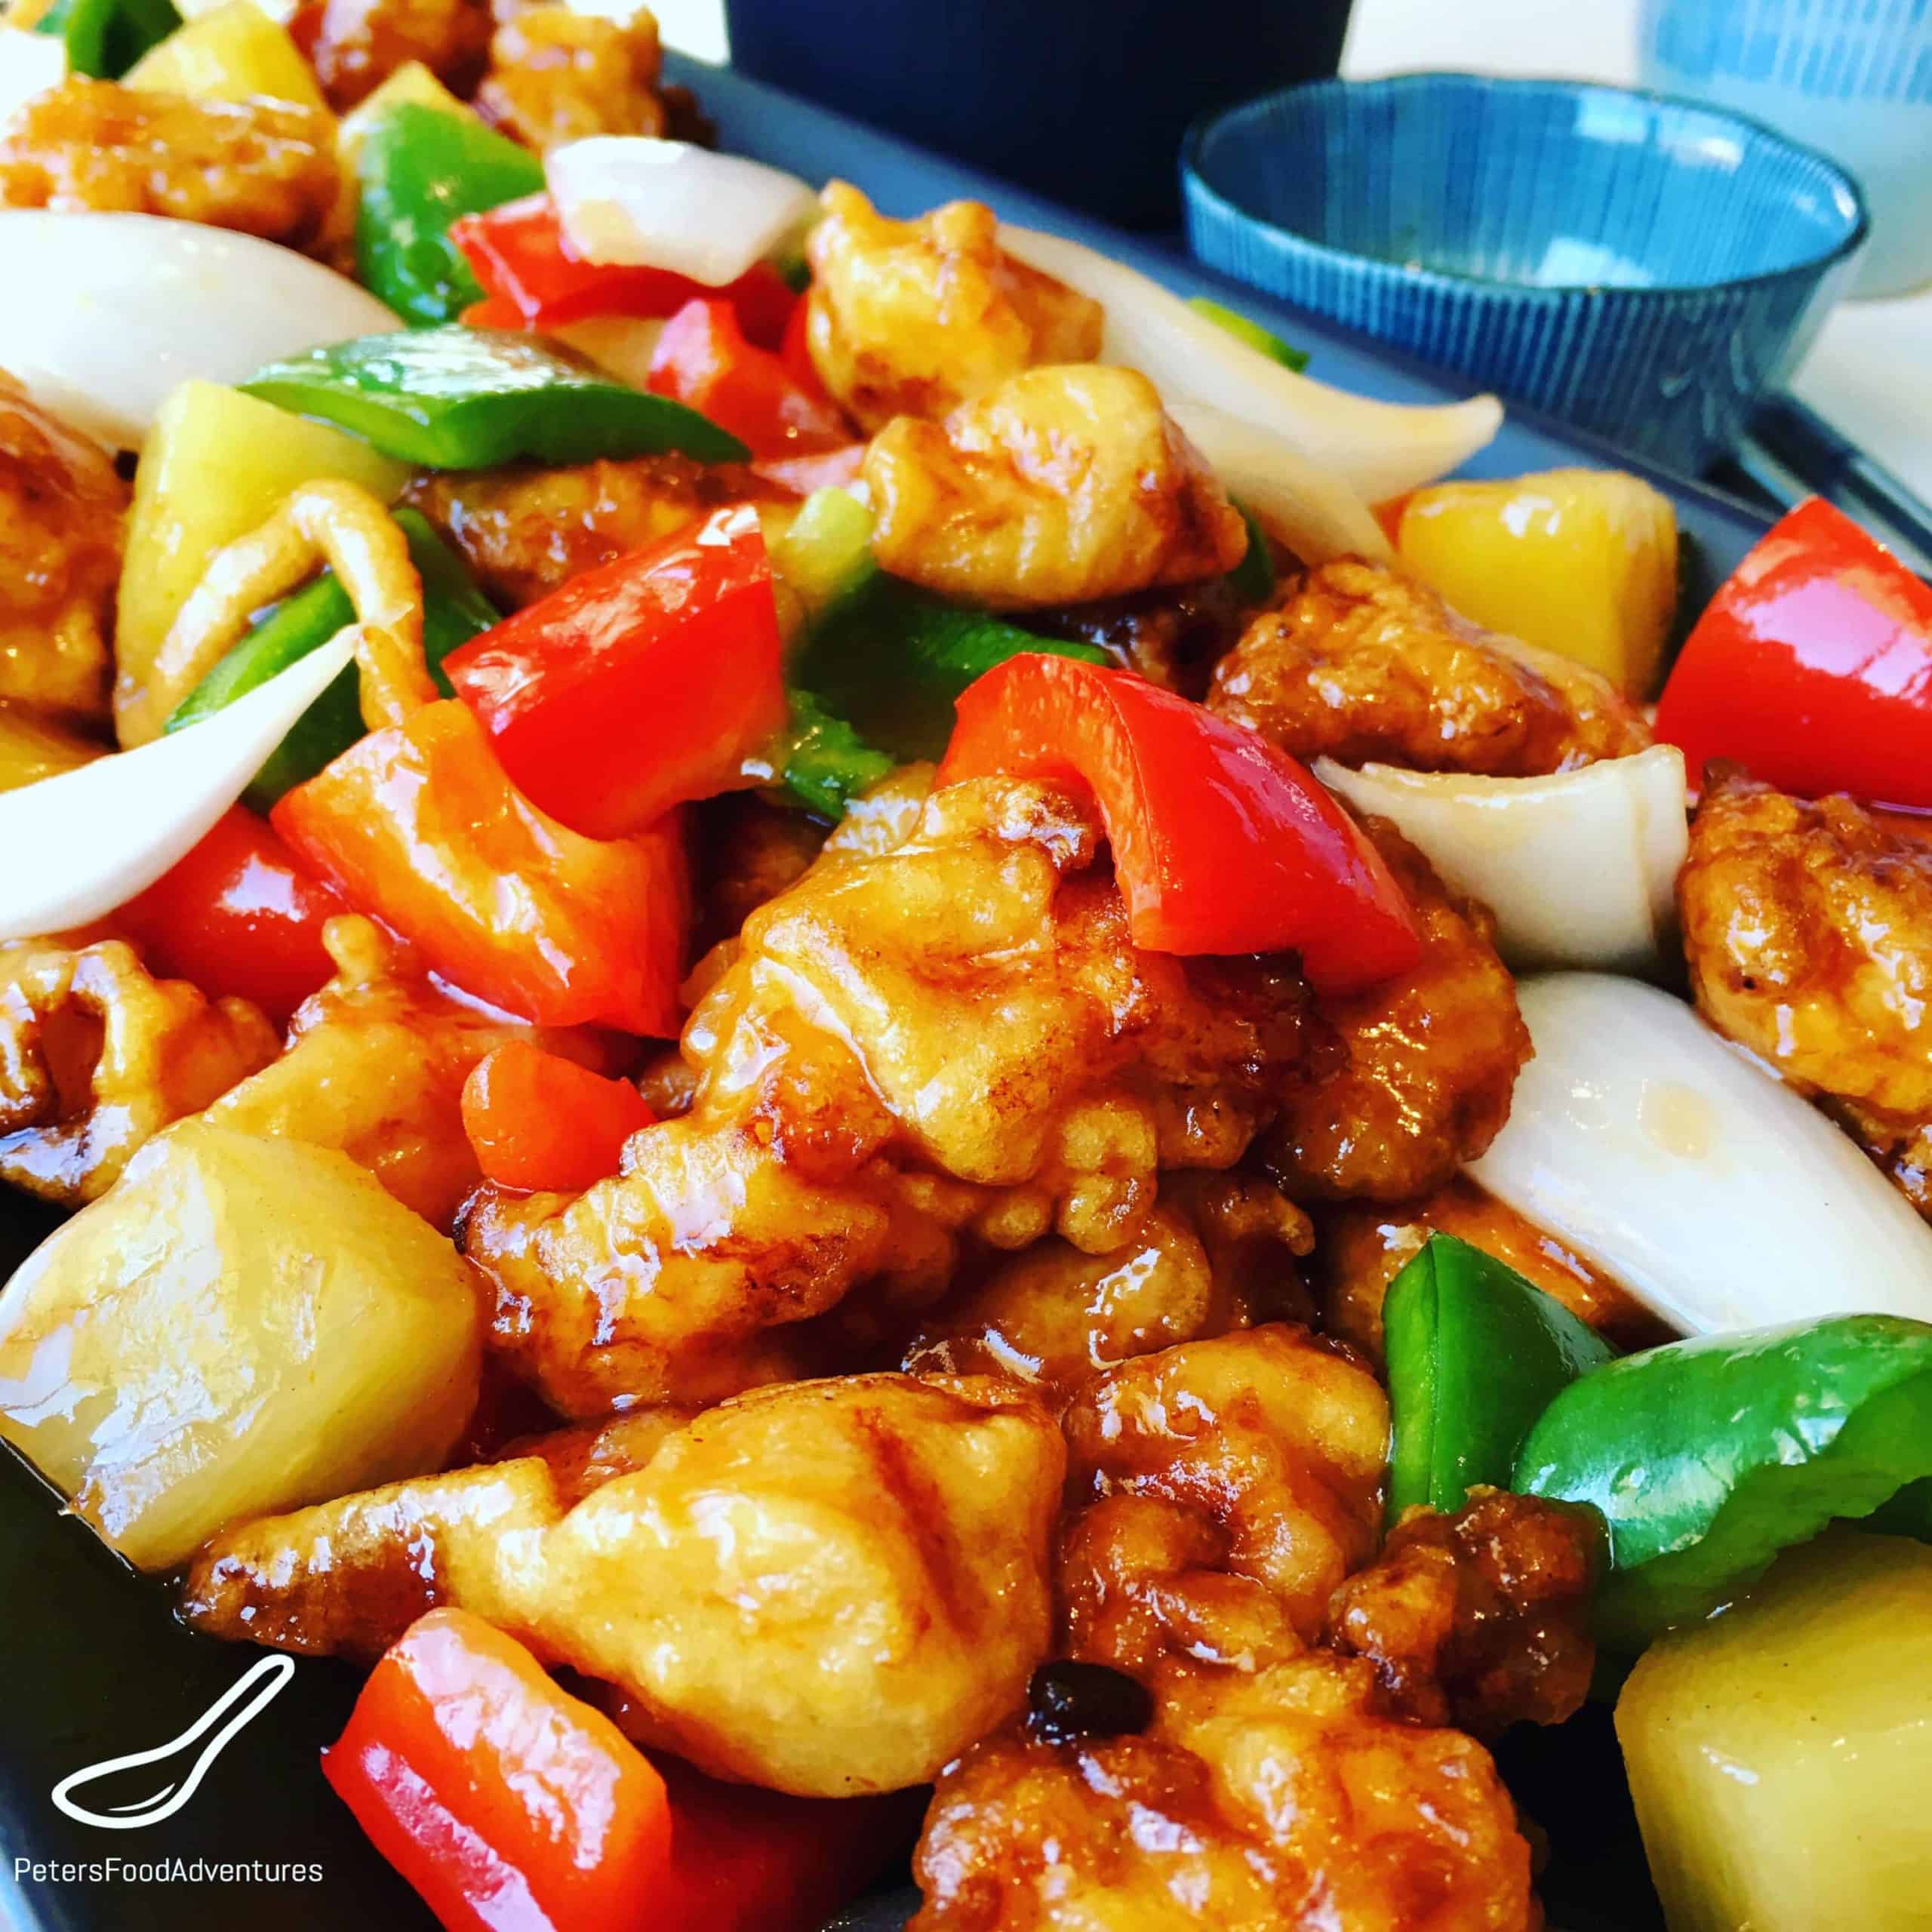 Boneless Sweet and Sour Pork in a crispy batter, food court style. The sauce is so easy to make with the sweetness of pineapple, bell peppers and onion. Tastes just like take out!